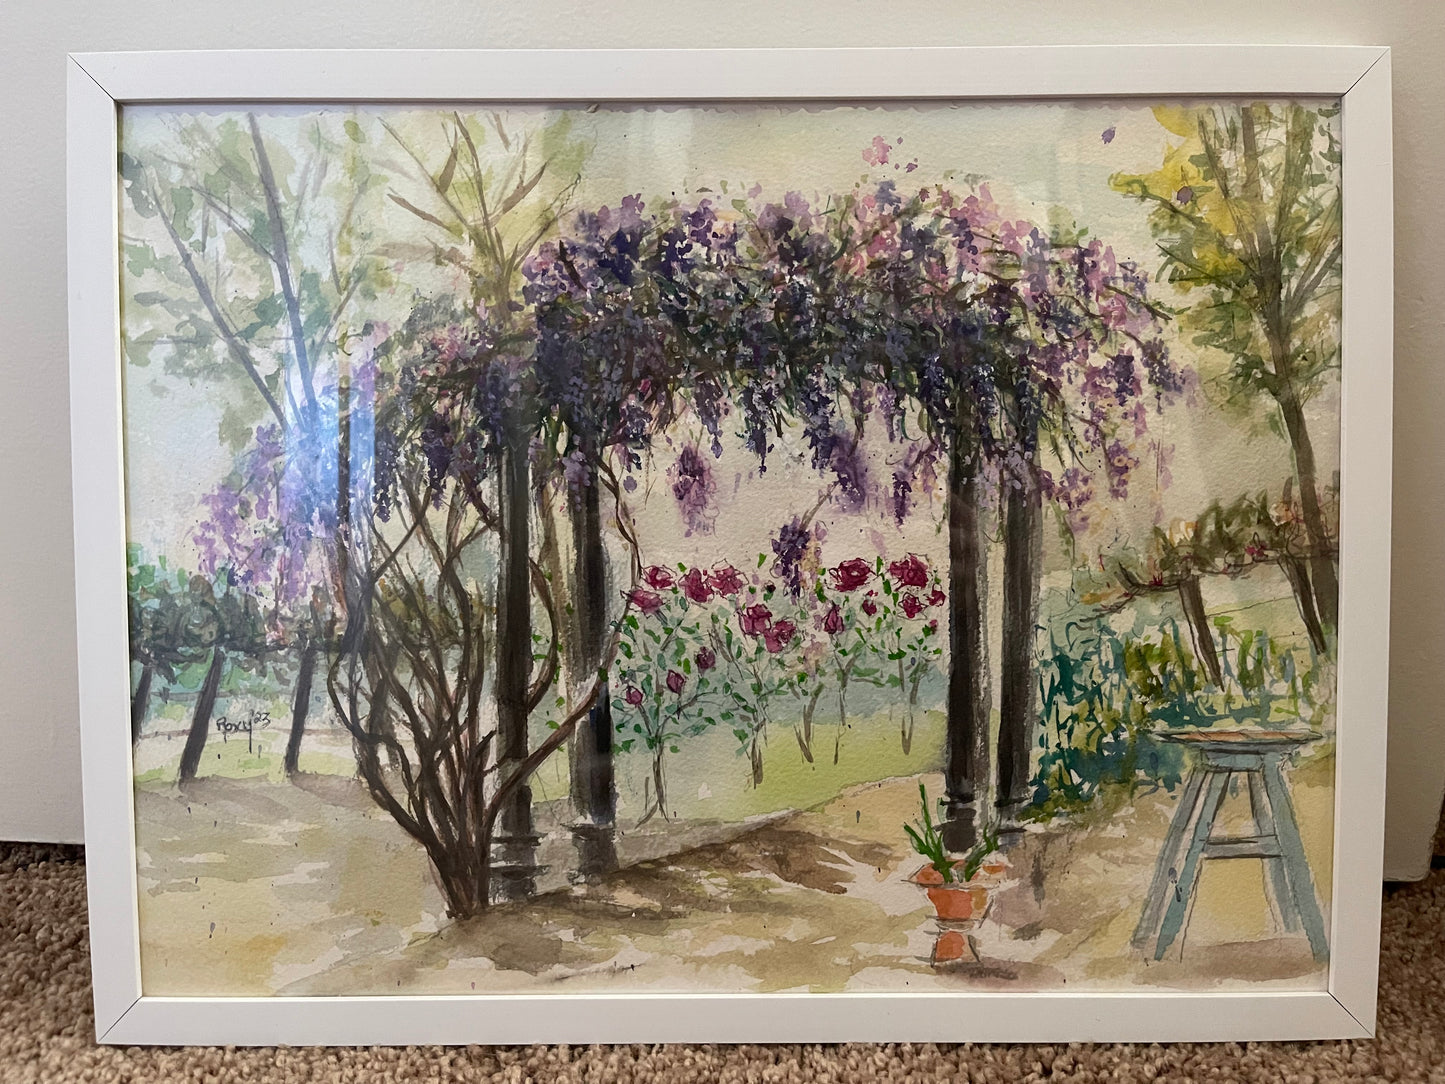 Wisteria at Somerset (Vineyard and Winery in Temecula) Original Watercolor and Gouache Painting Framed